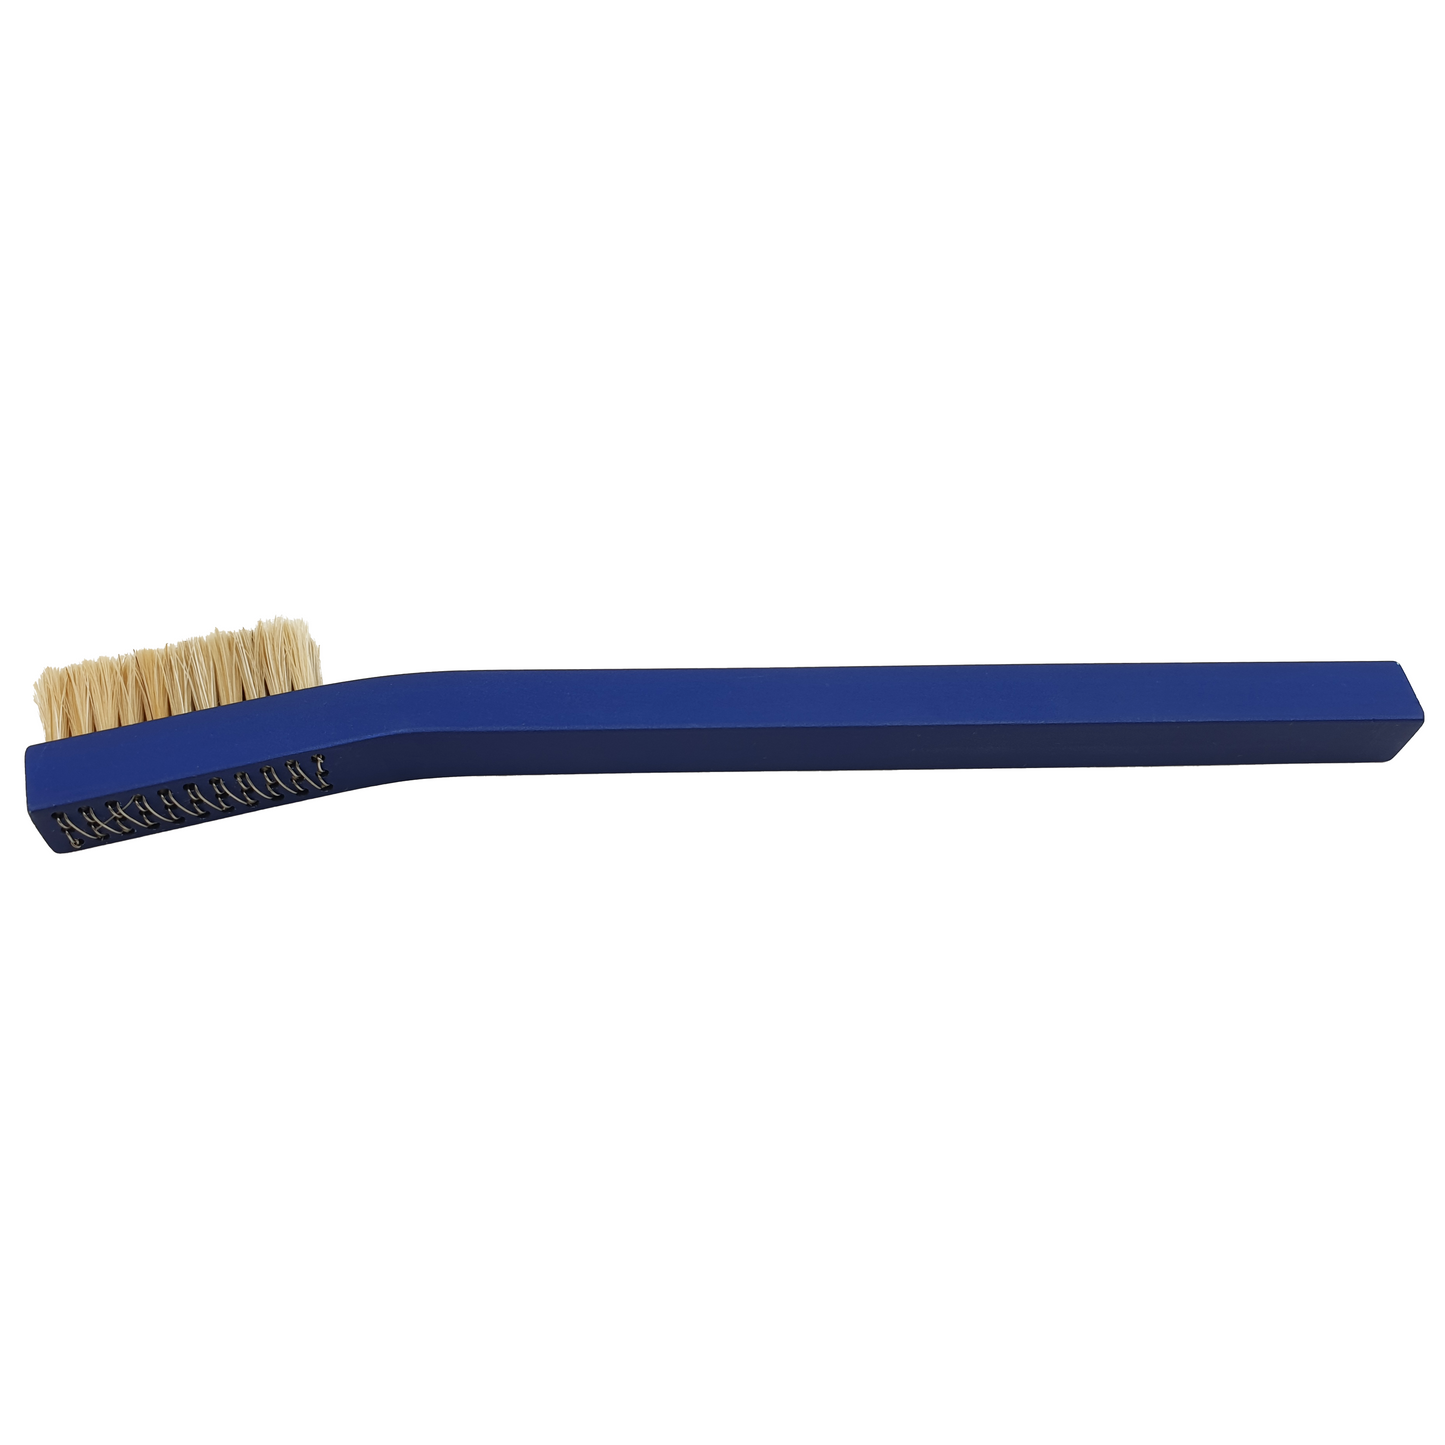 Techspray 2042-1 blue handle esd safe brush for cleaning and coating printed circuit board